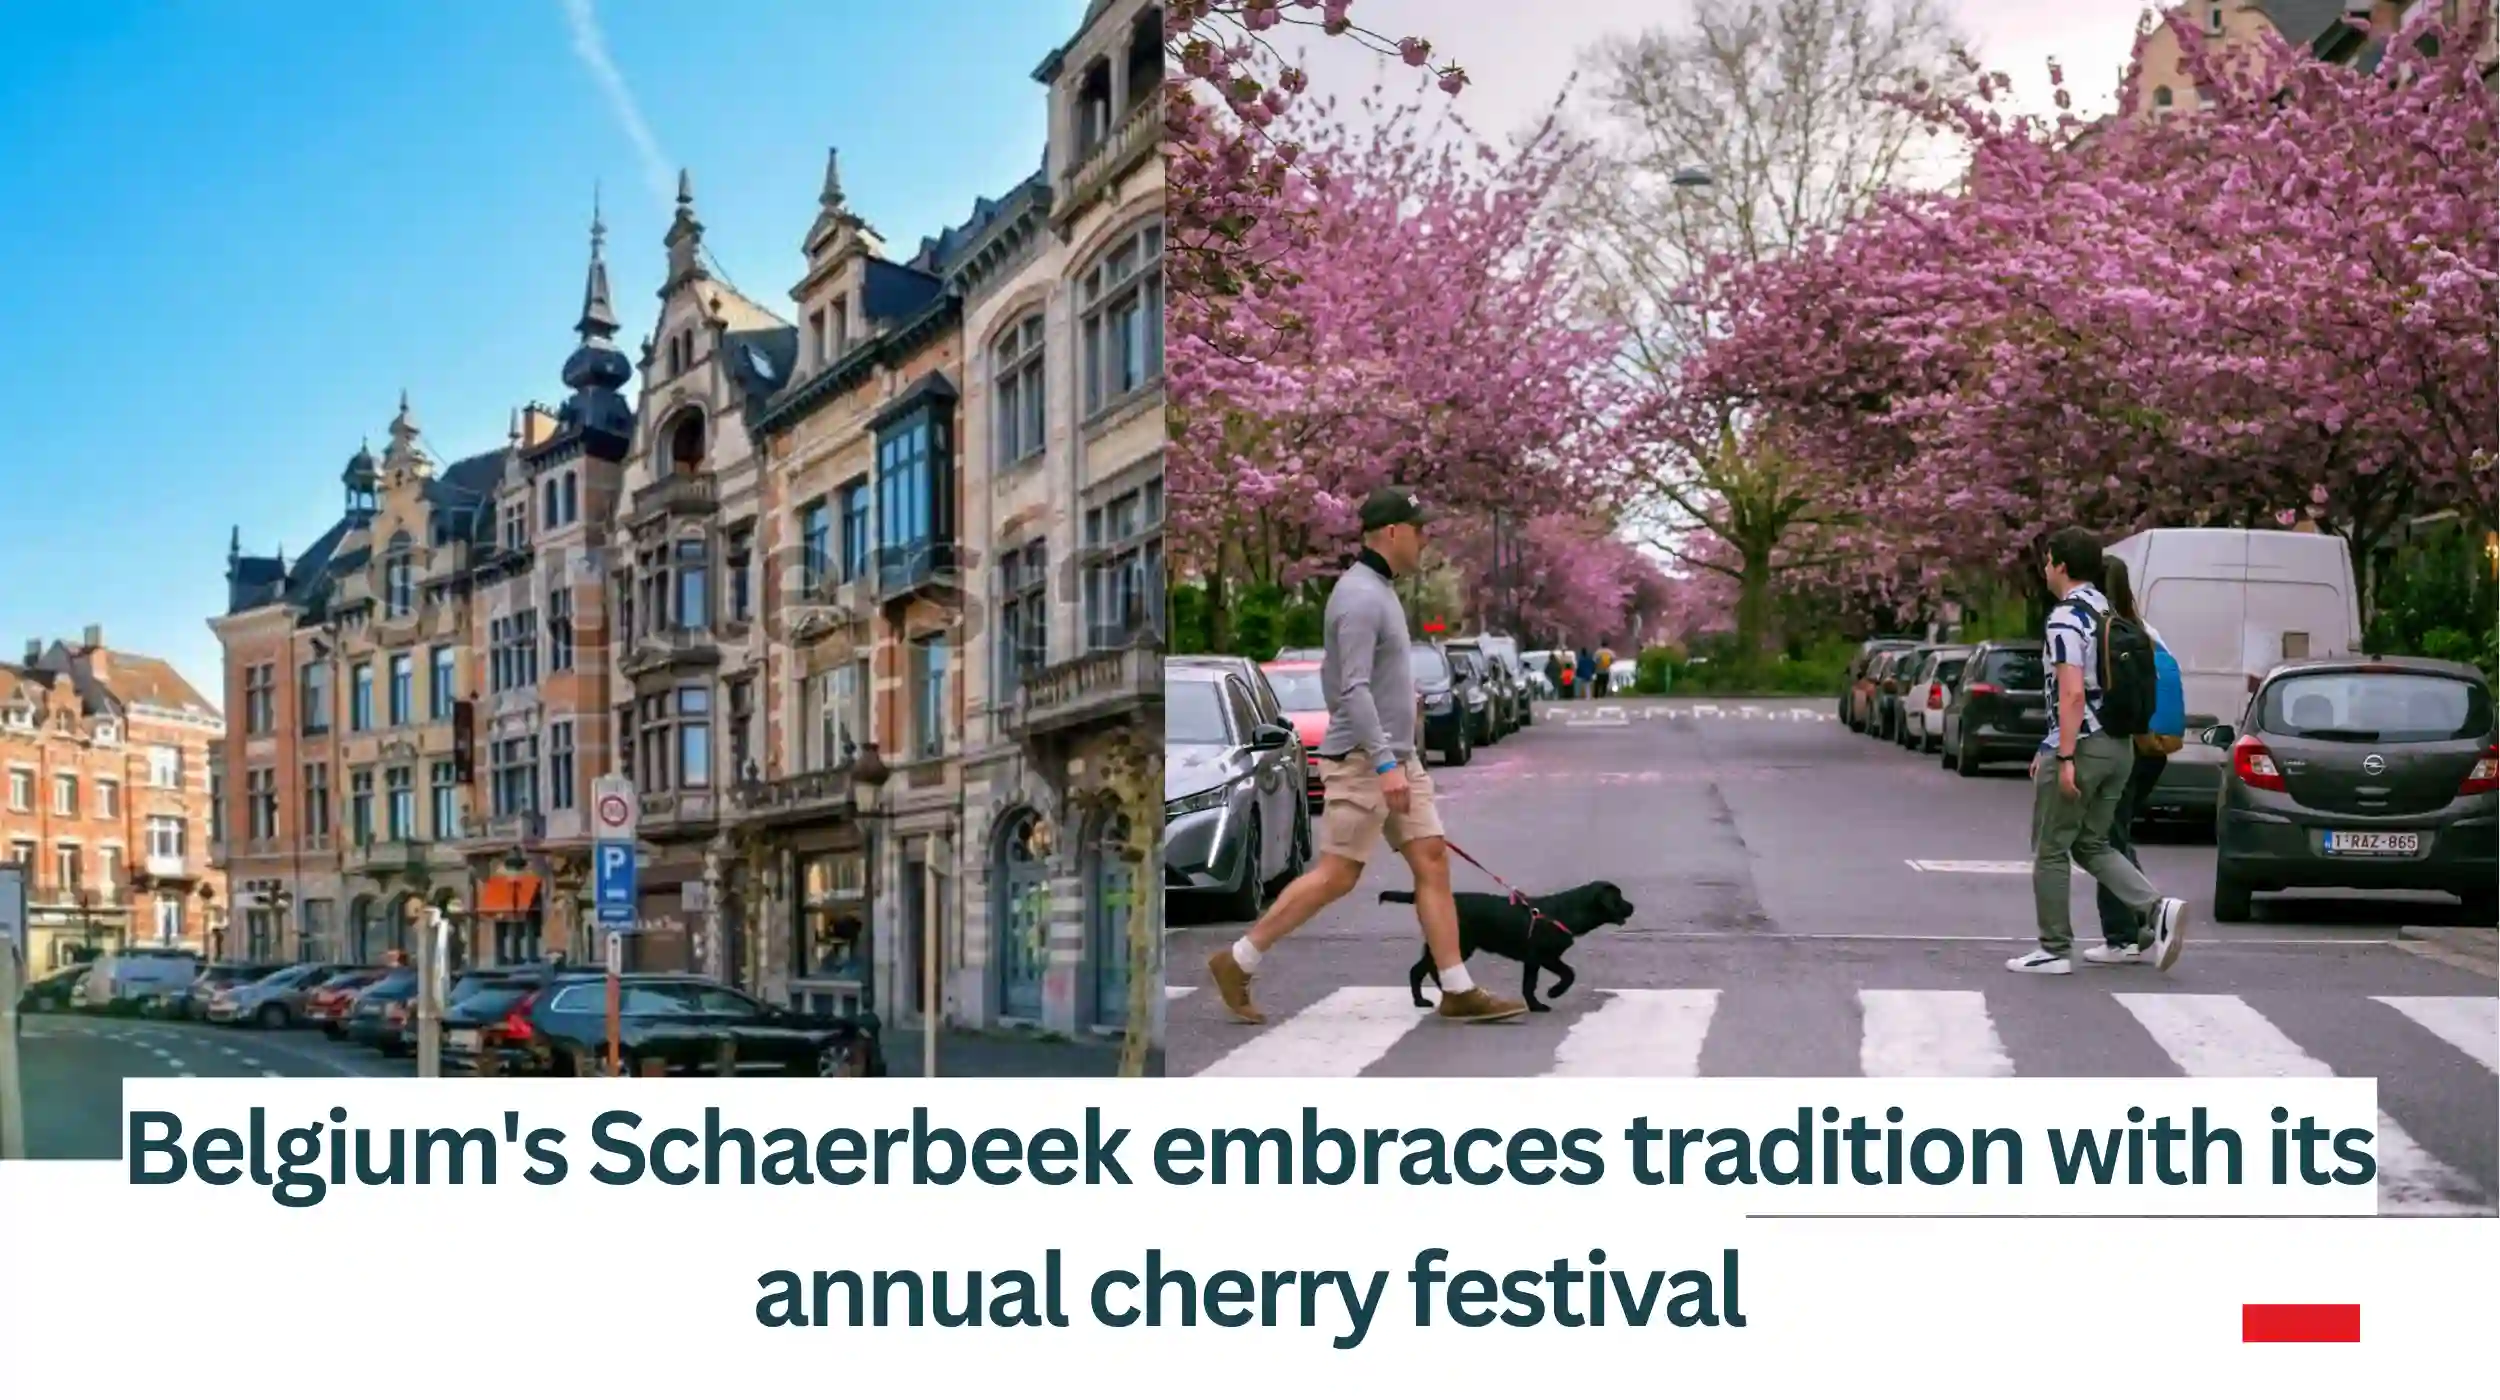 Belgiums-Schaerbeek-embraces-tradition-with-its-annual-cherry-festival